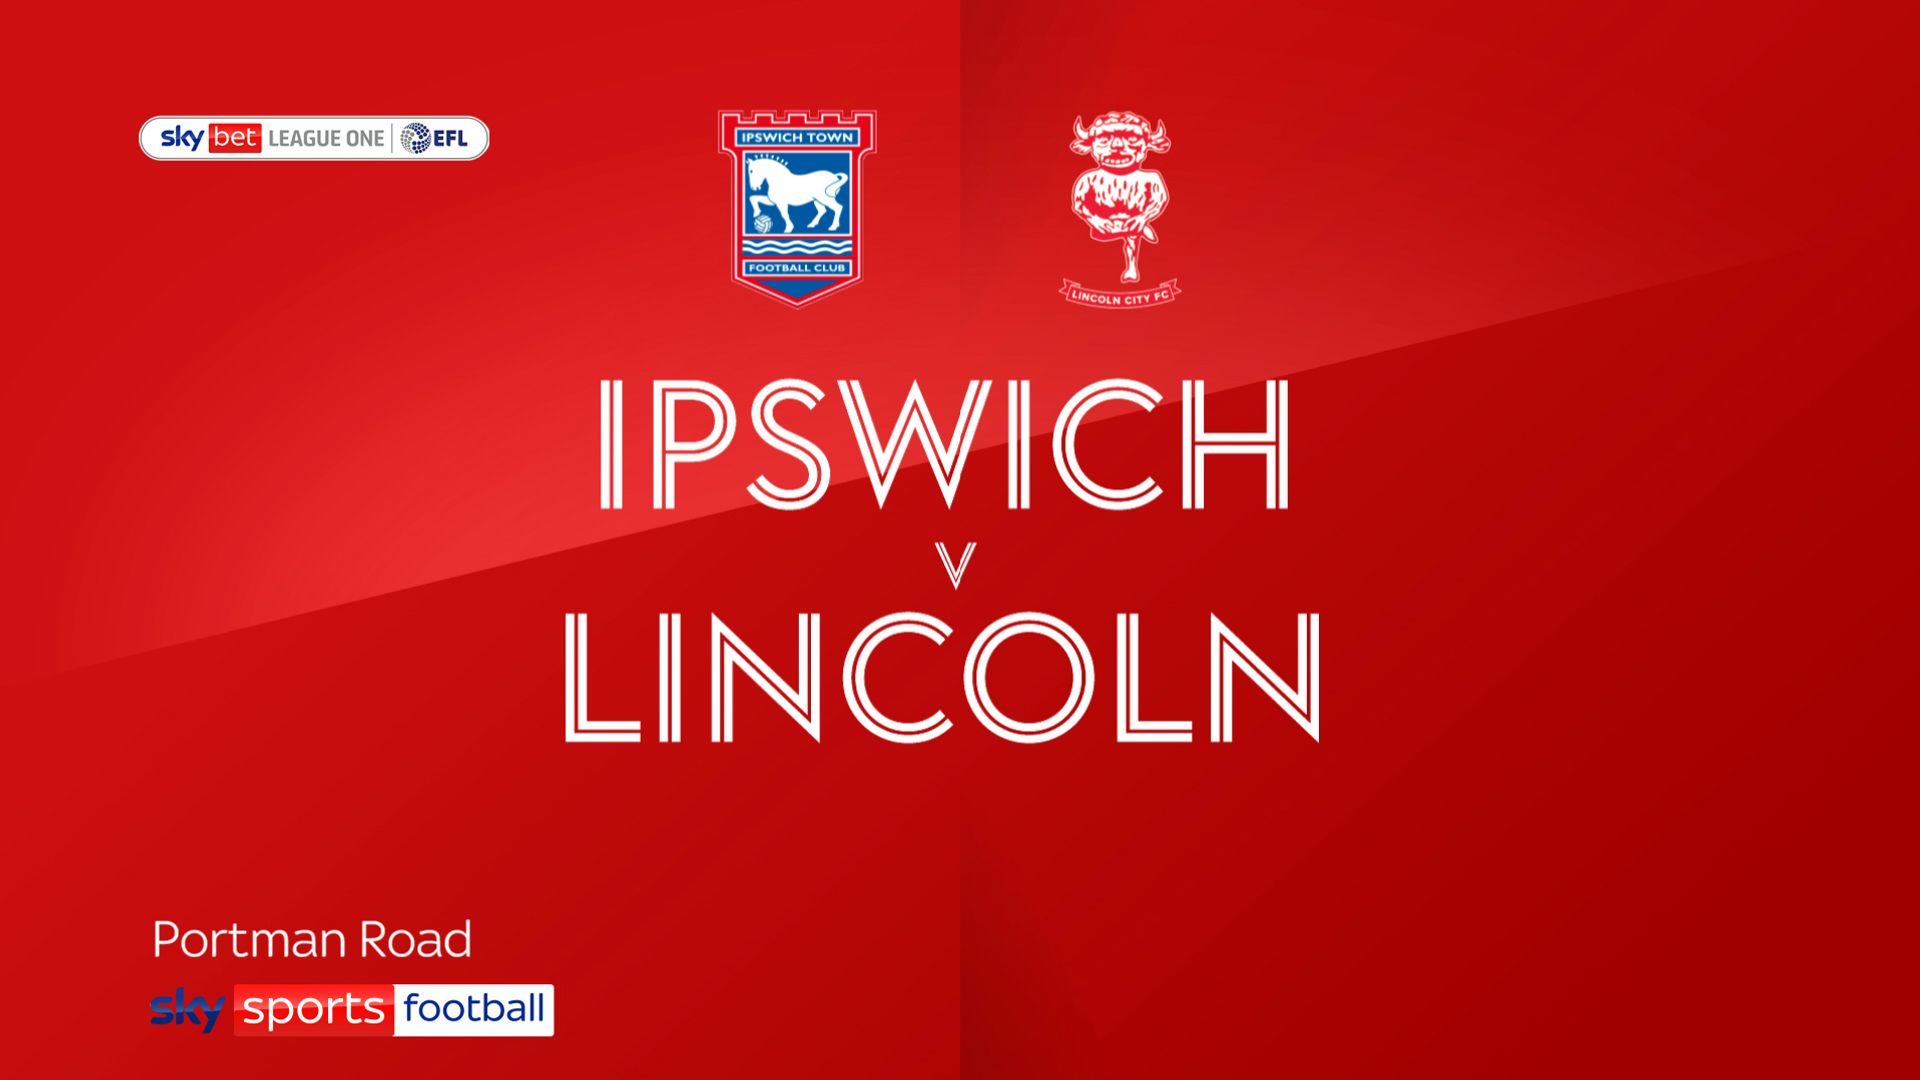 Ipswich beat Lincoln to maintain play-off hopes